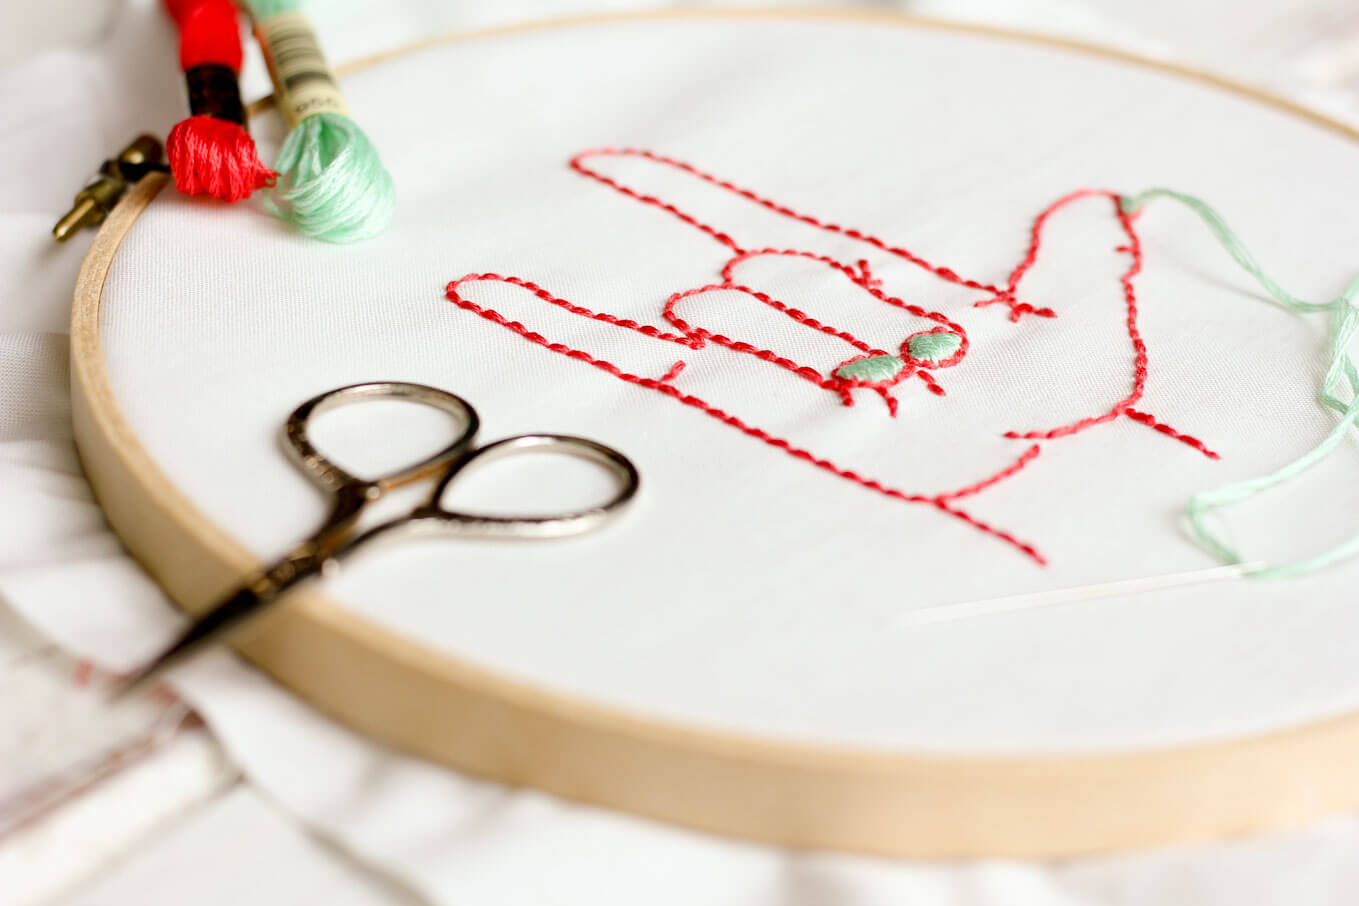 Embroidery Patterns Free I Love You Free Embroidery Pattern Make Do Crew